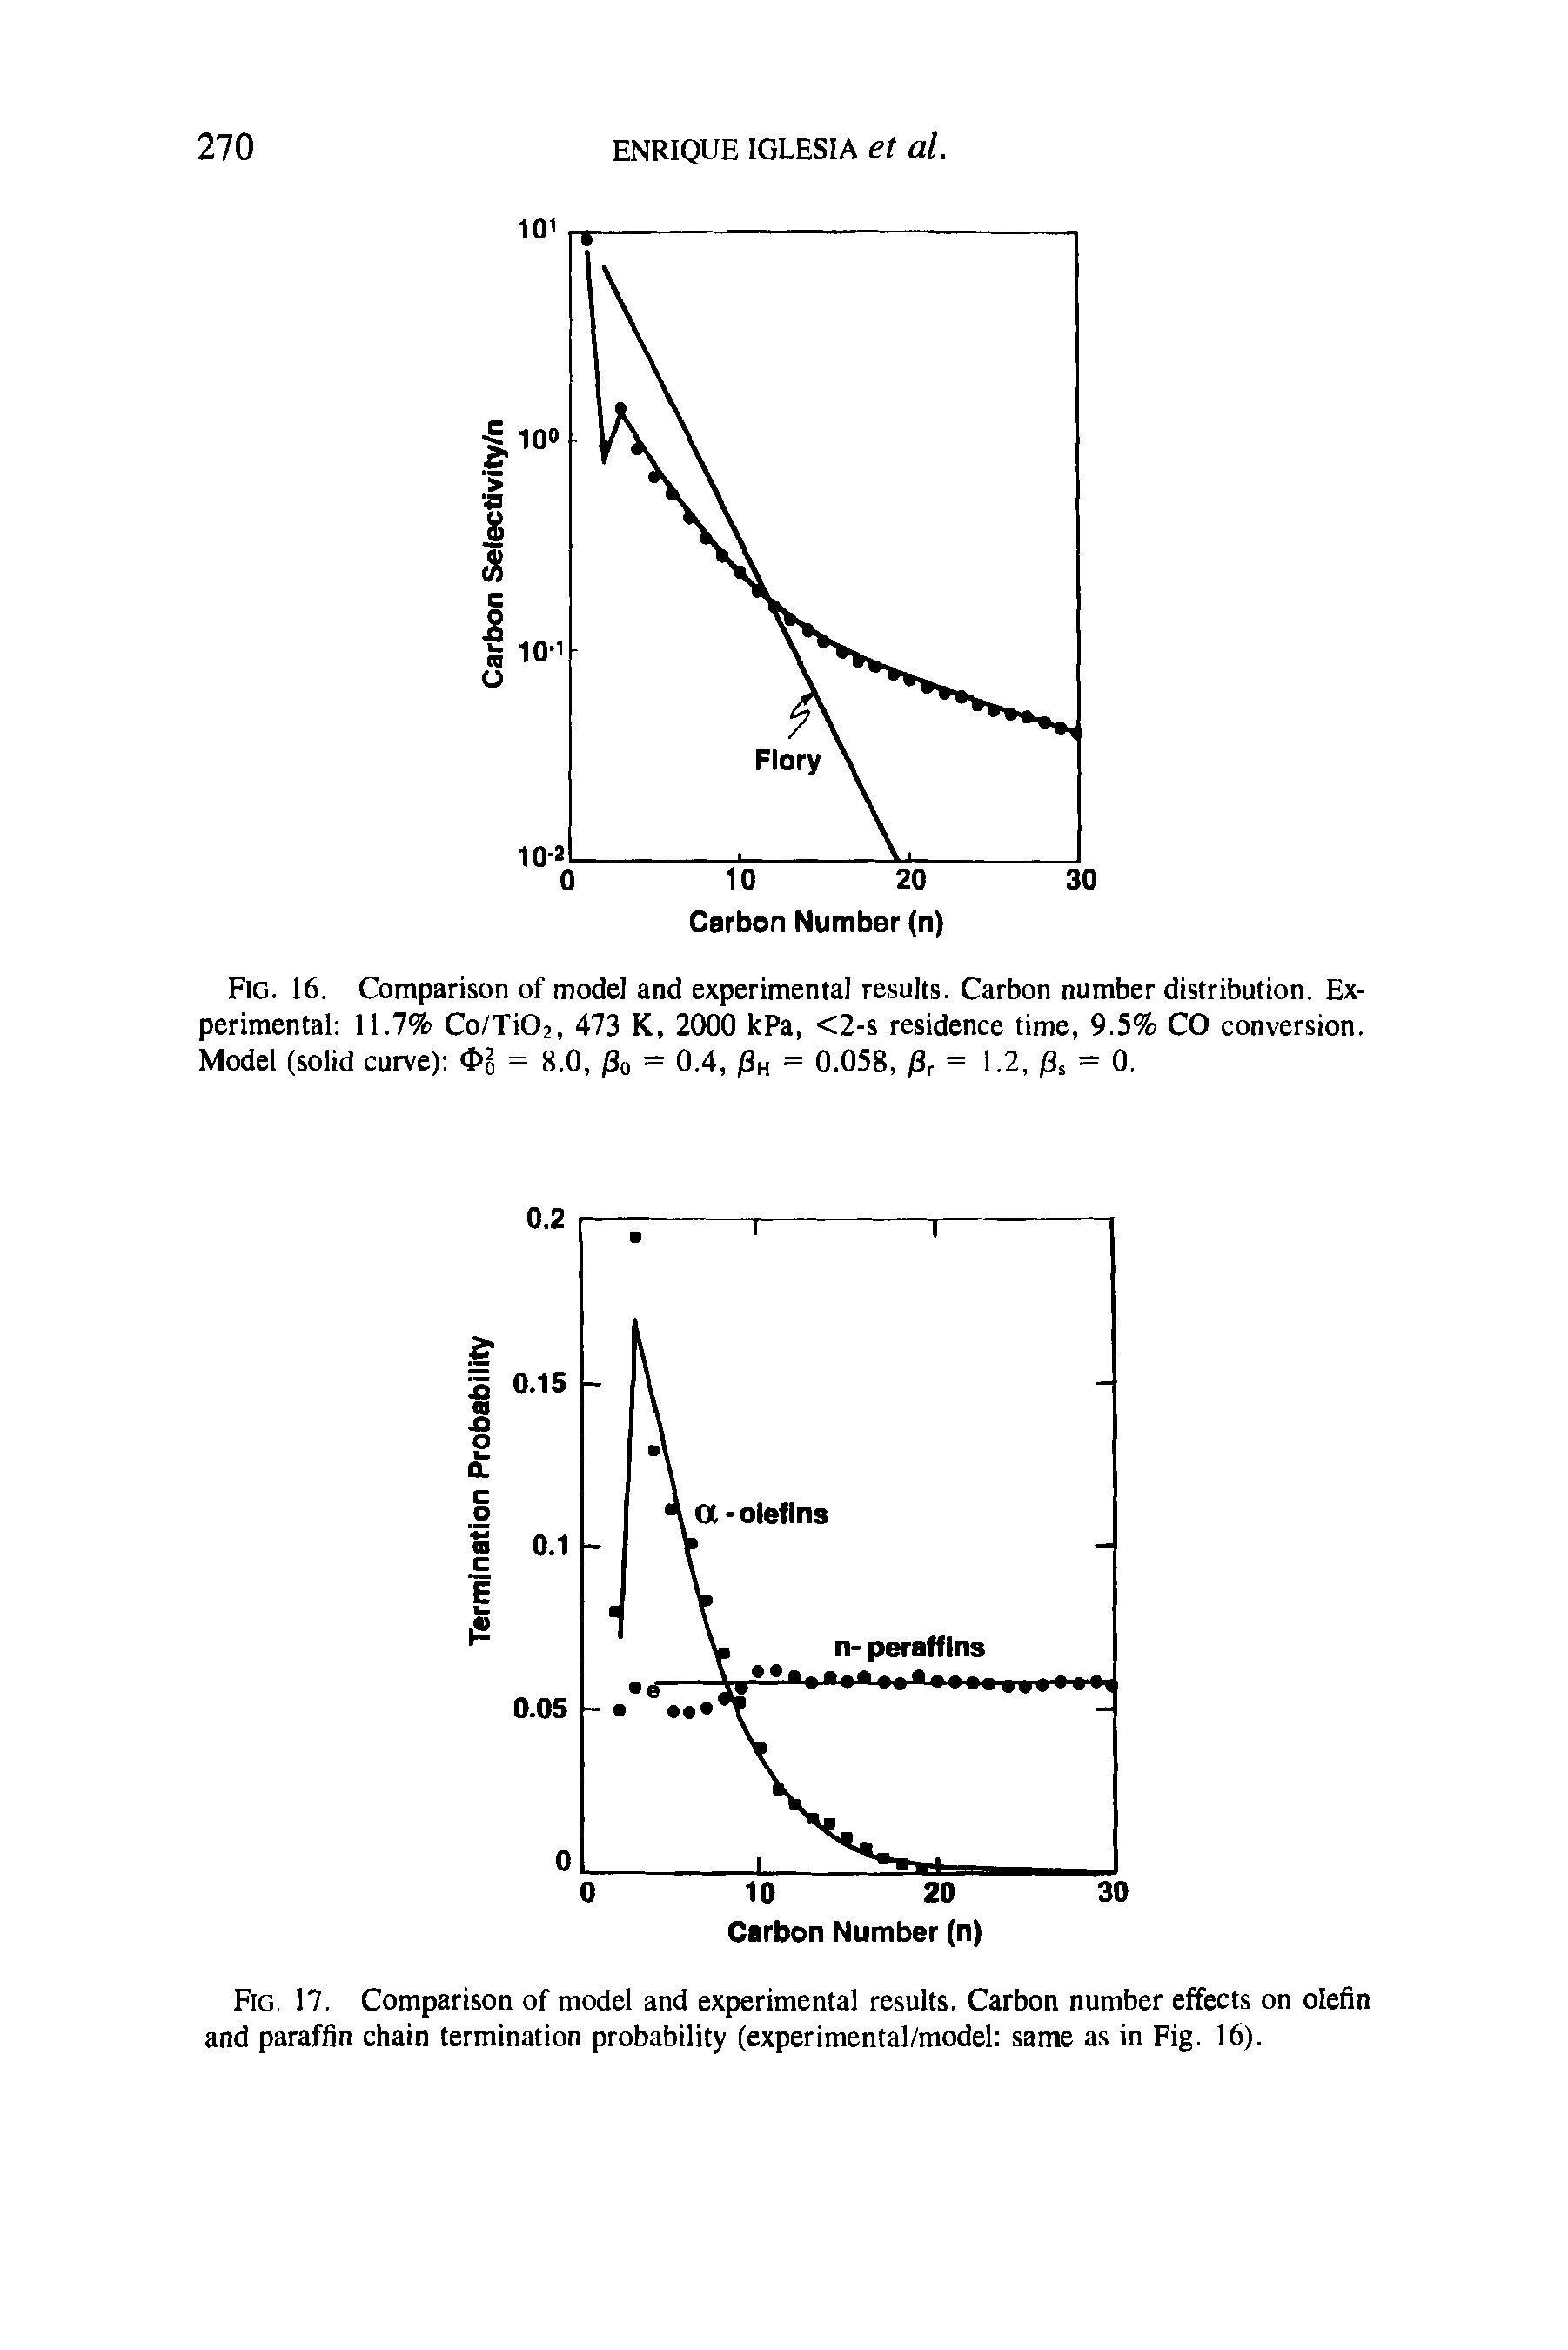 Fig. 17. Comparison of model and experimental results. Carbon number effects on olefin and paraffin chain termination probability (experimental/model same as in Fig. 16).